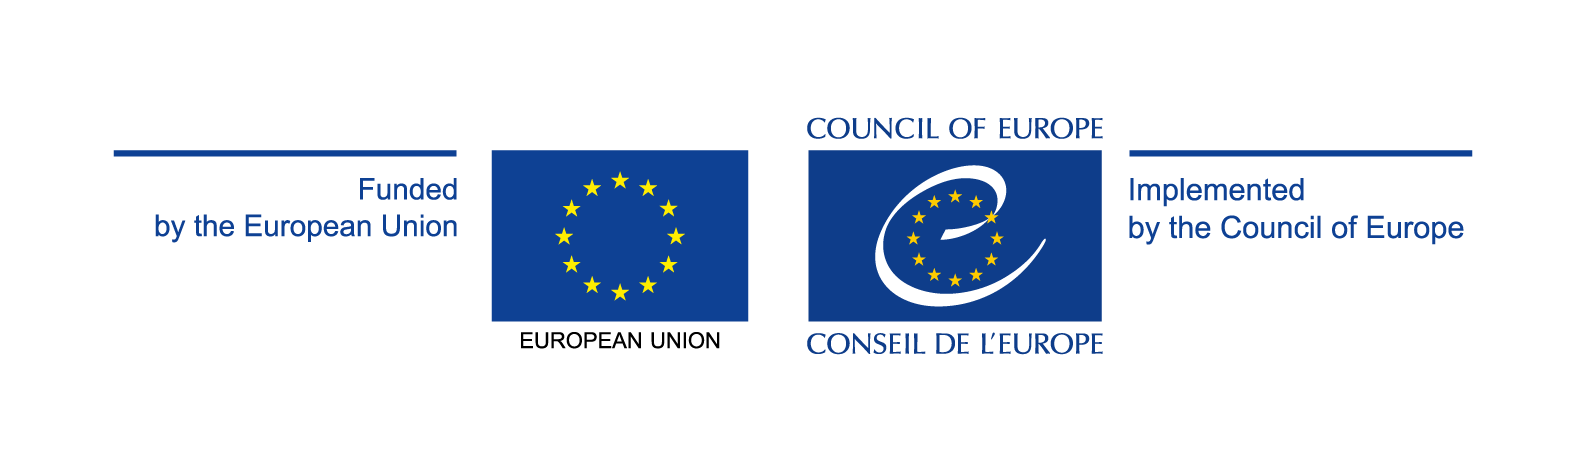 European Union and Council of Europe logo